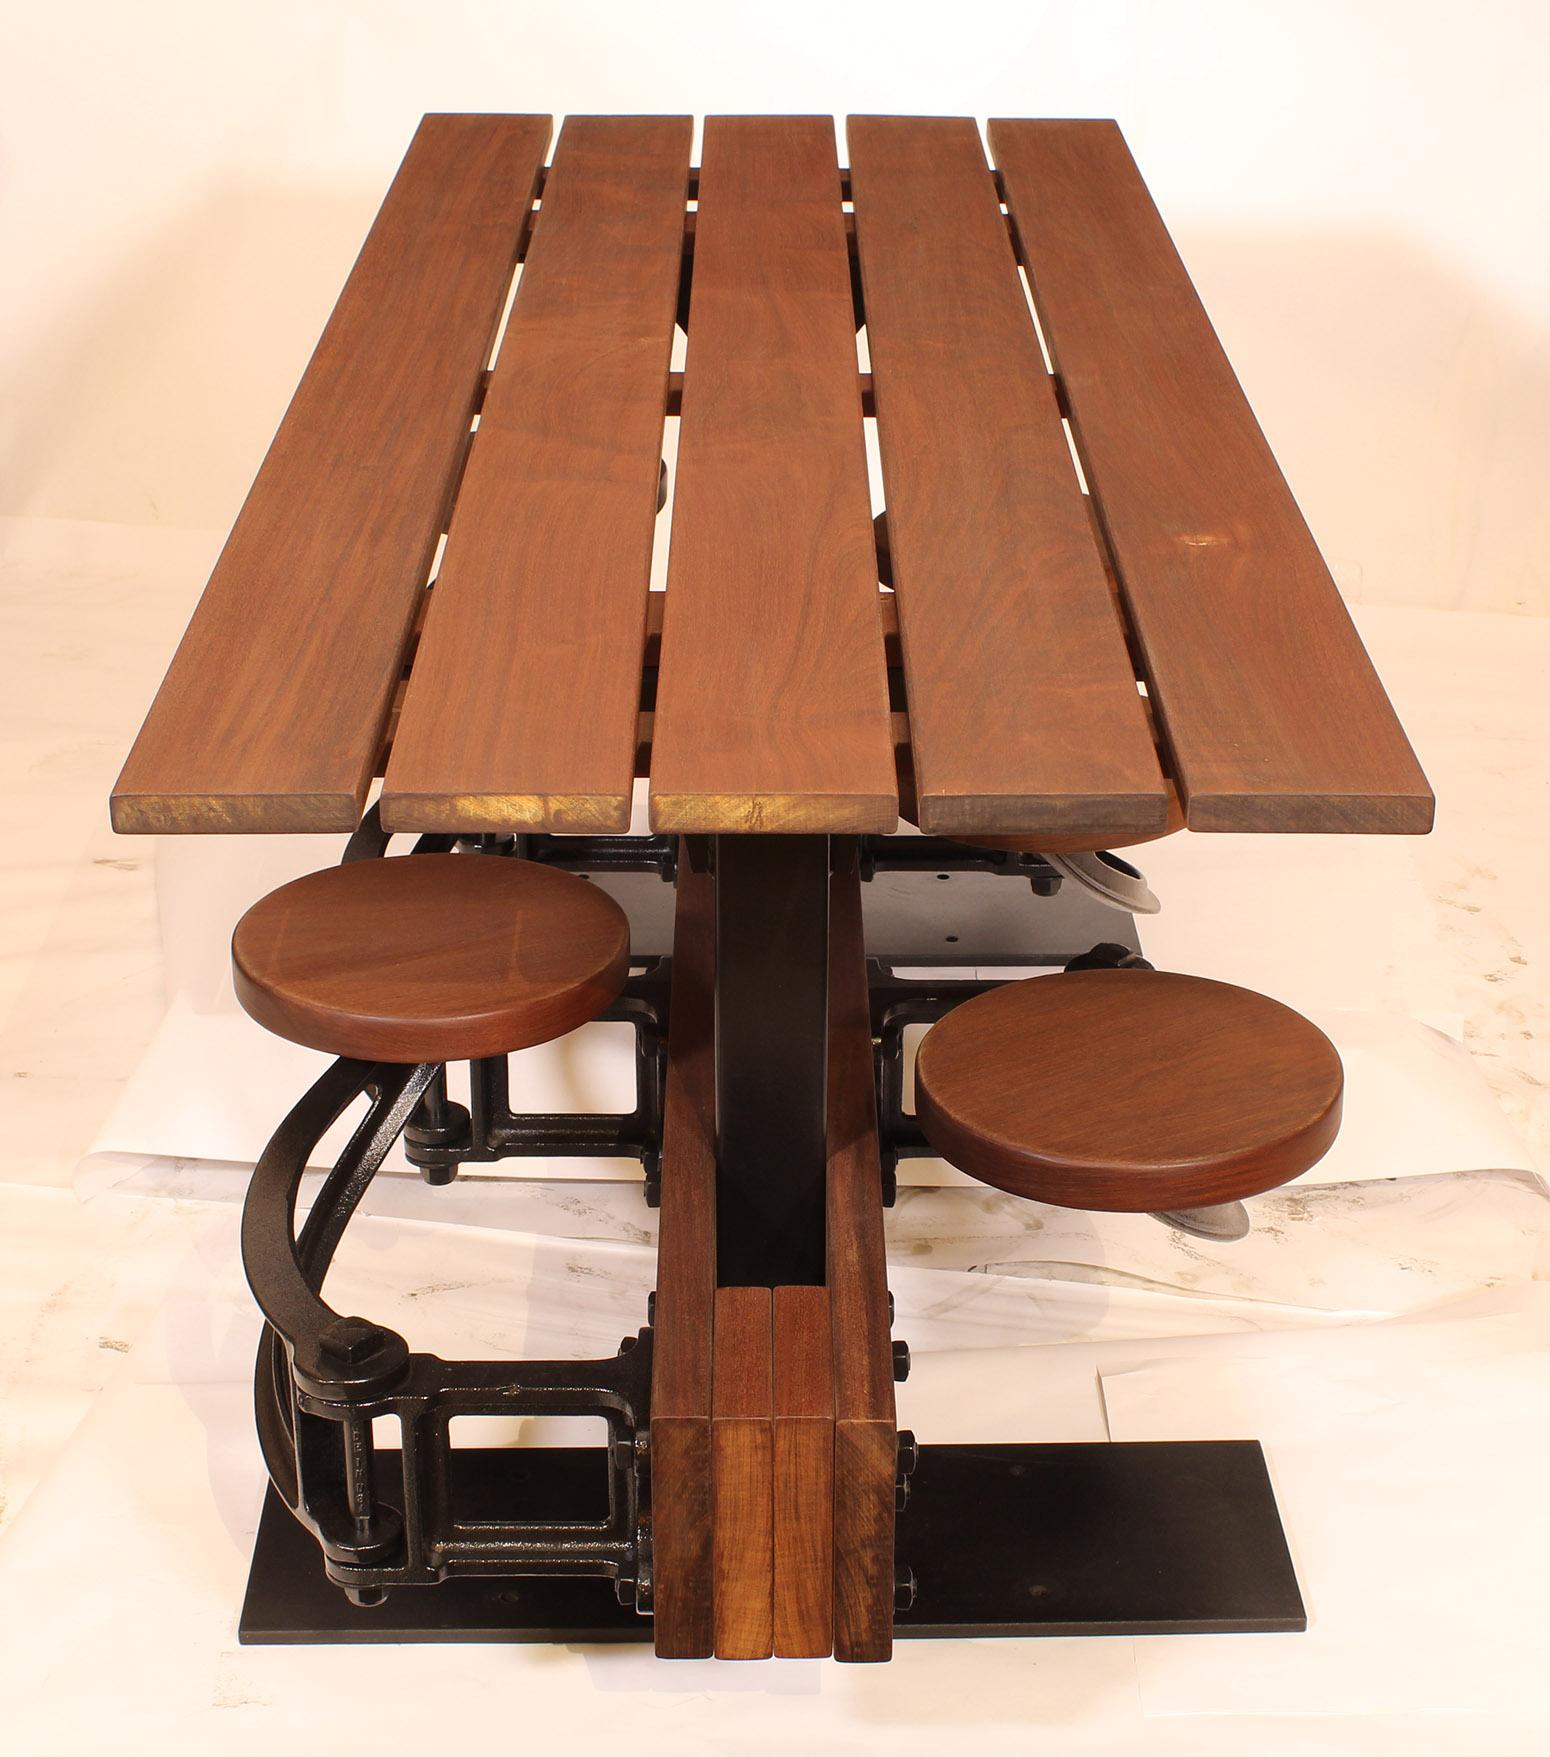 Cast Industrial Swing-Out-Seat Outdoor Dining Table For Sale